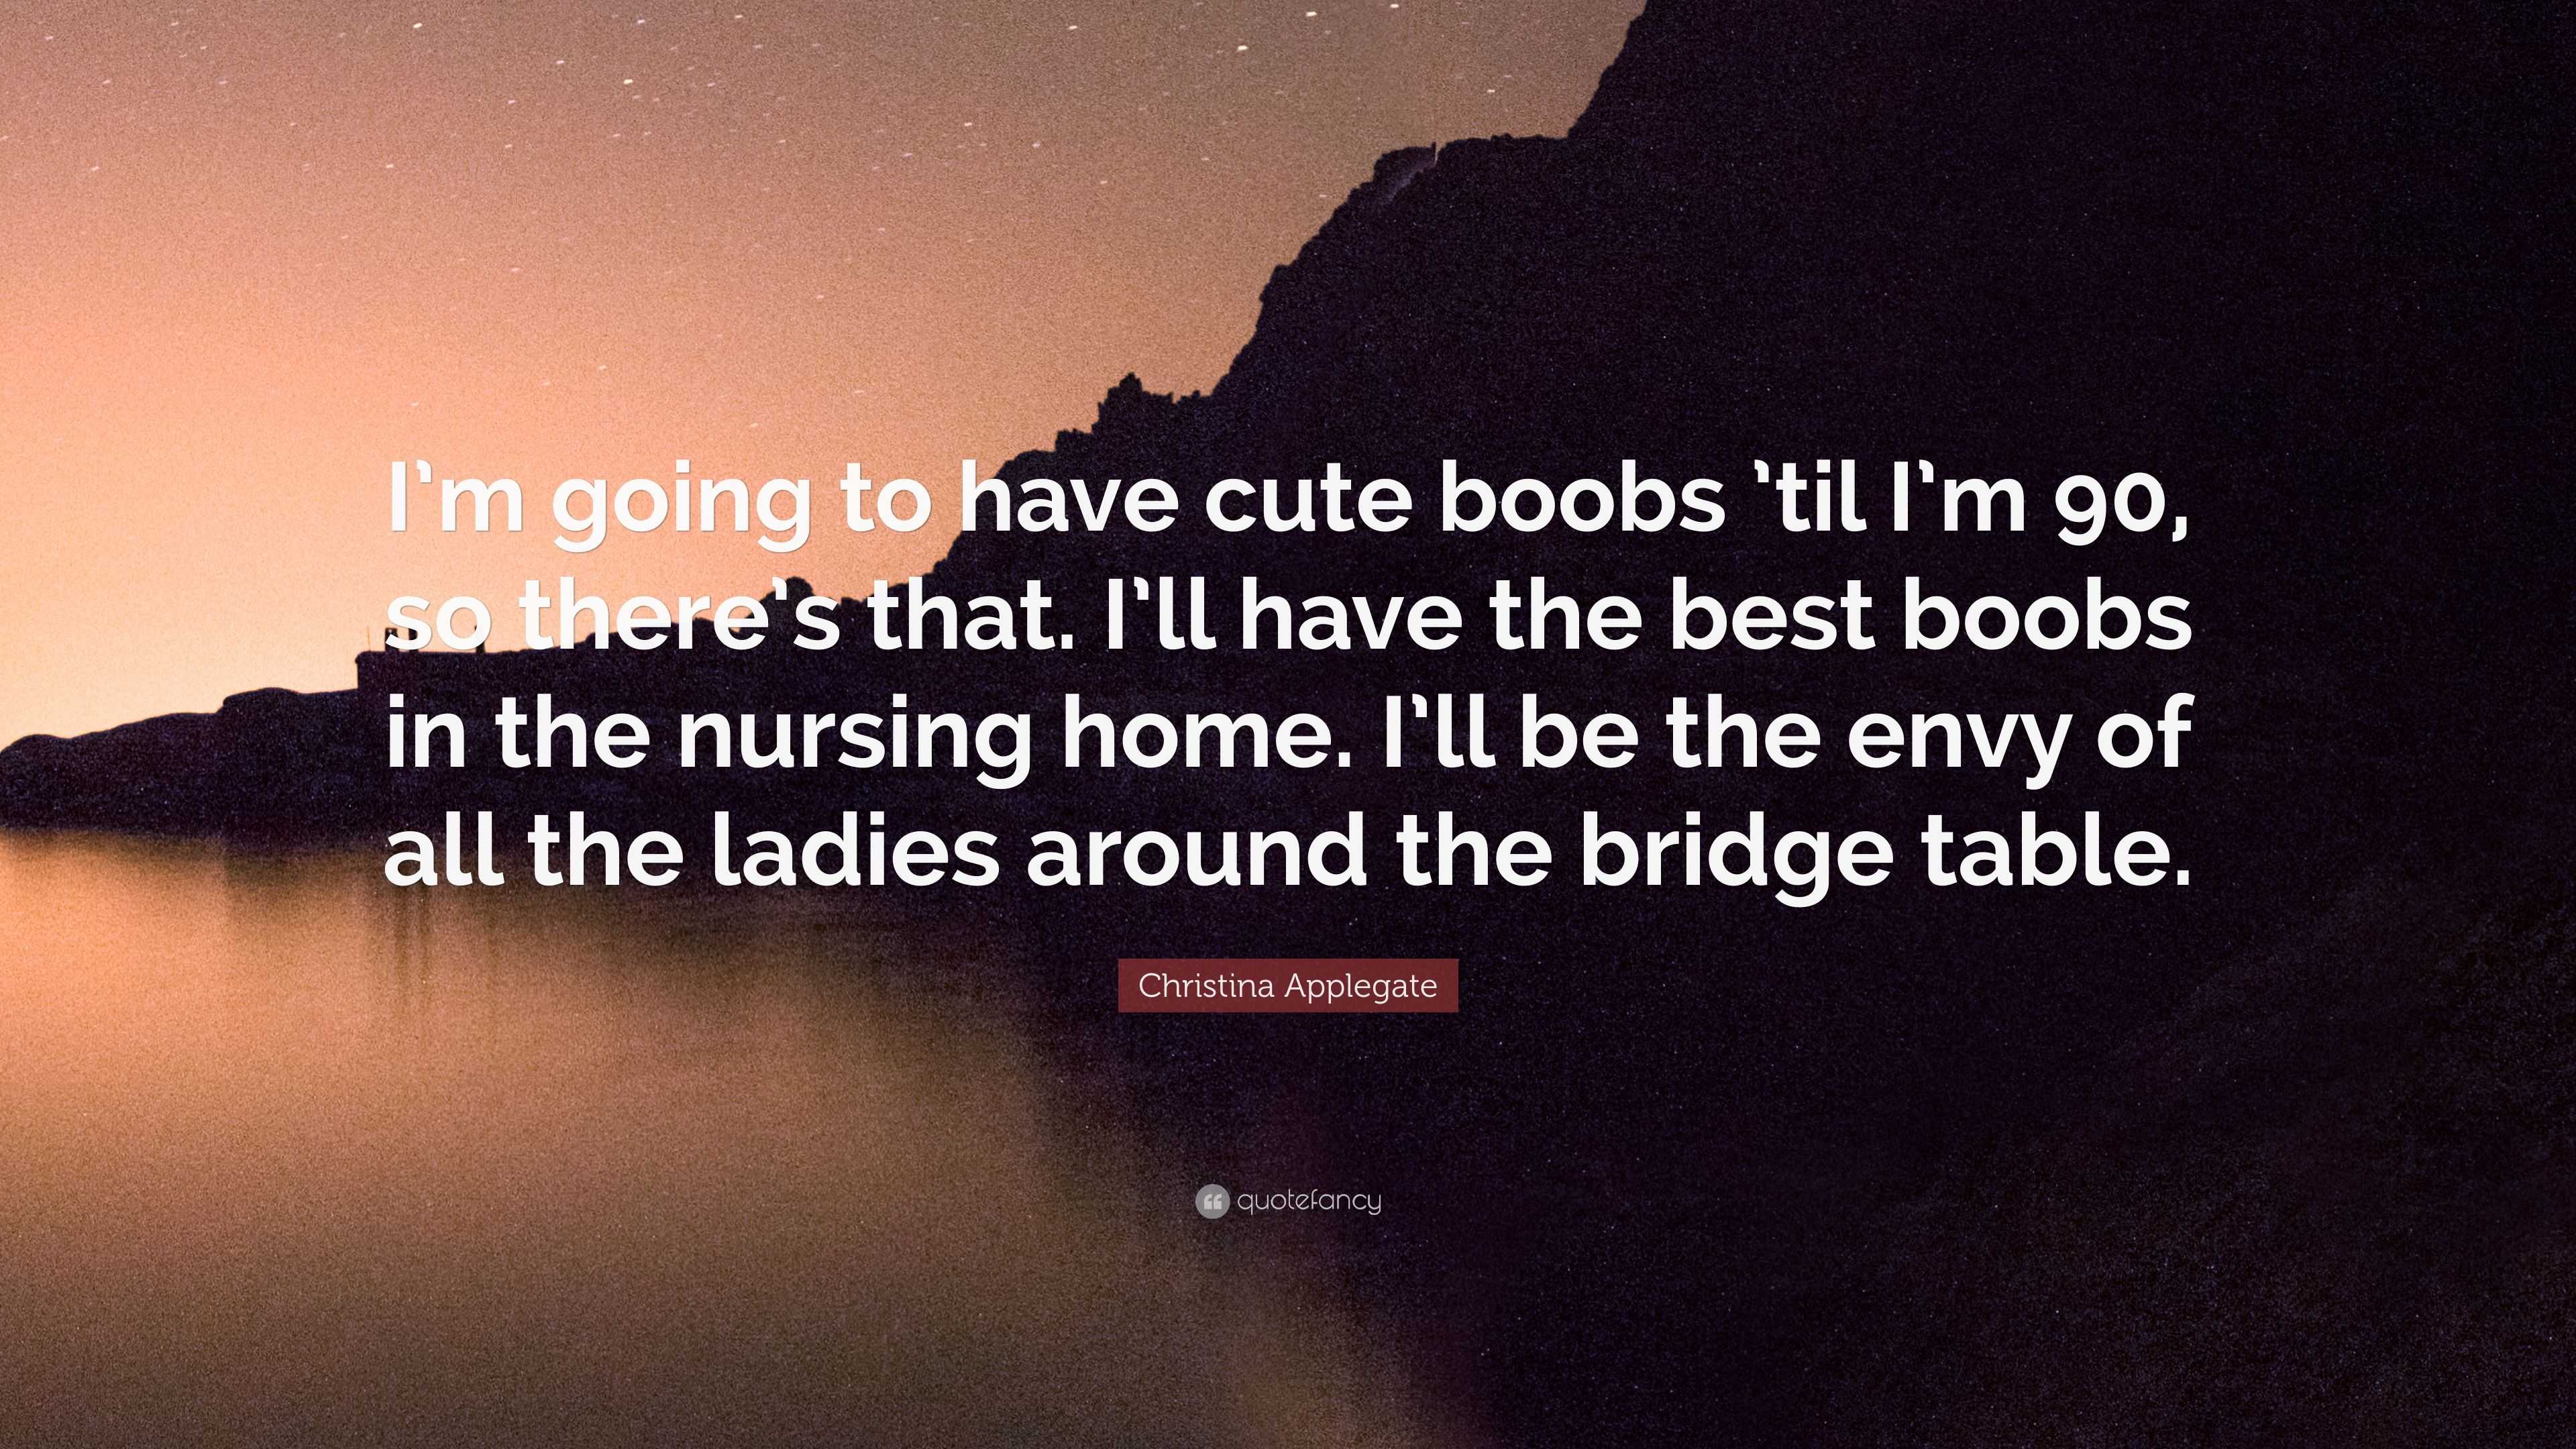 Christina Applegate Quote: “I'm going to have cute boobs 'til I'm